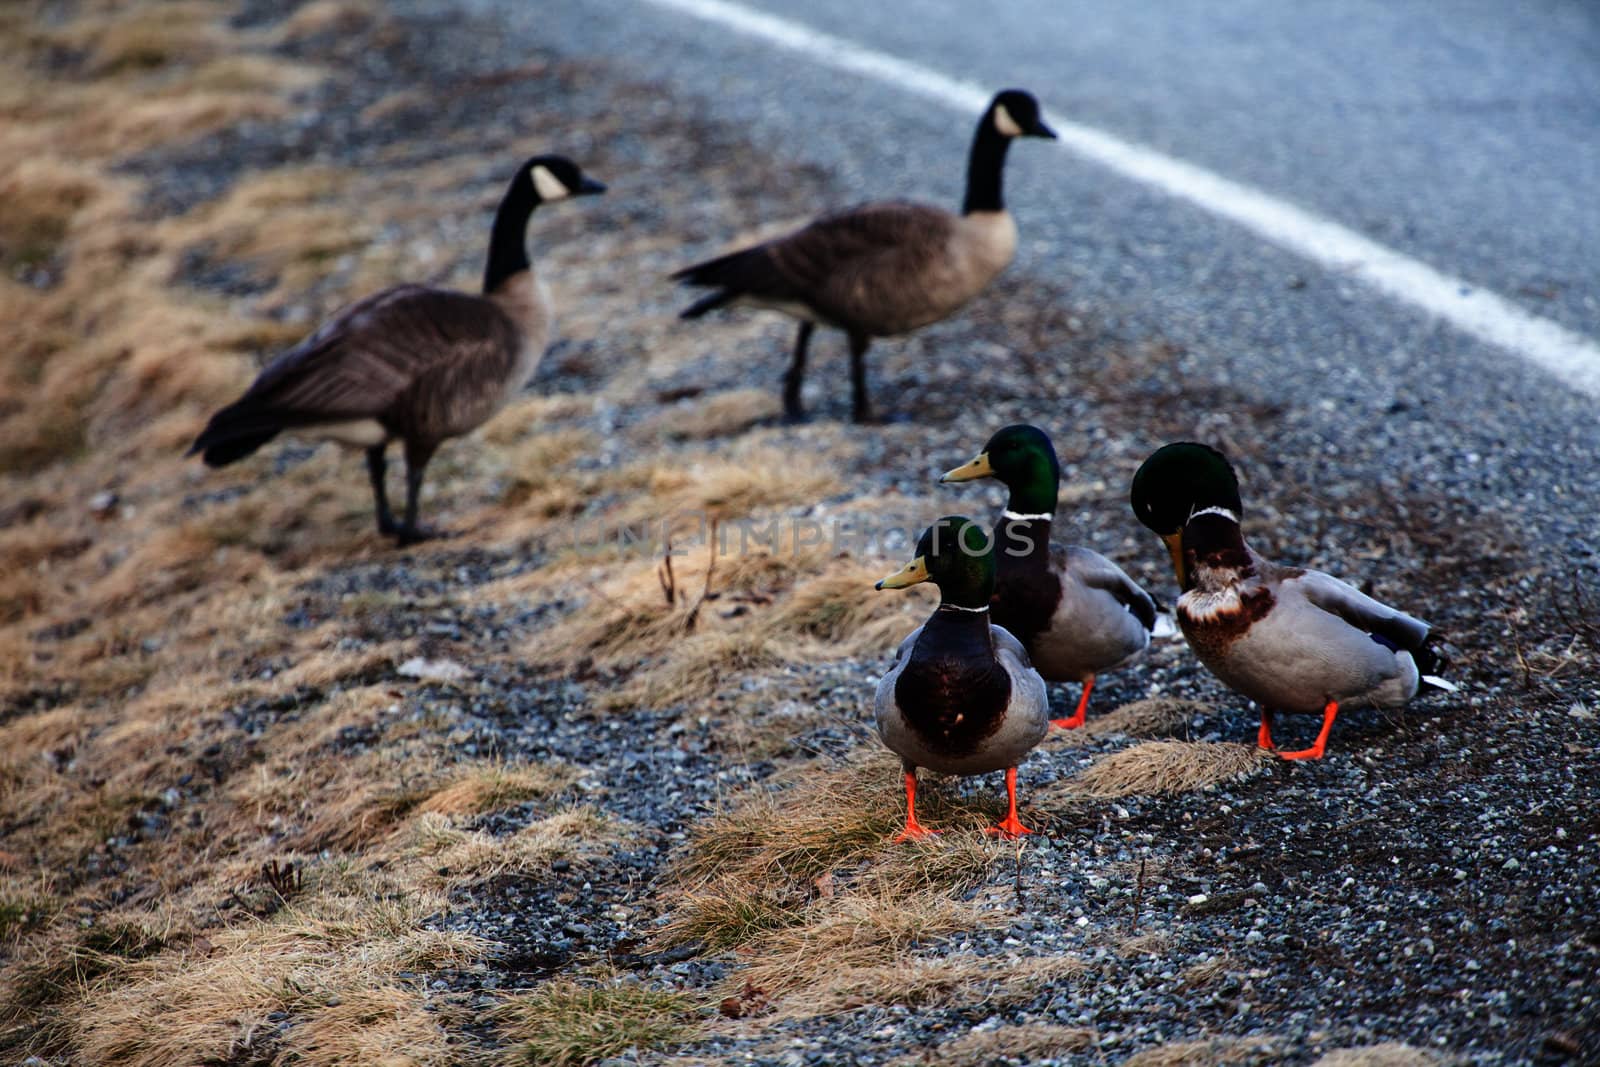 Three mallard ducks sit next to a roadbed and look out over a hill